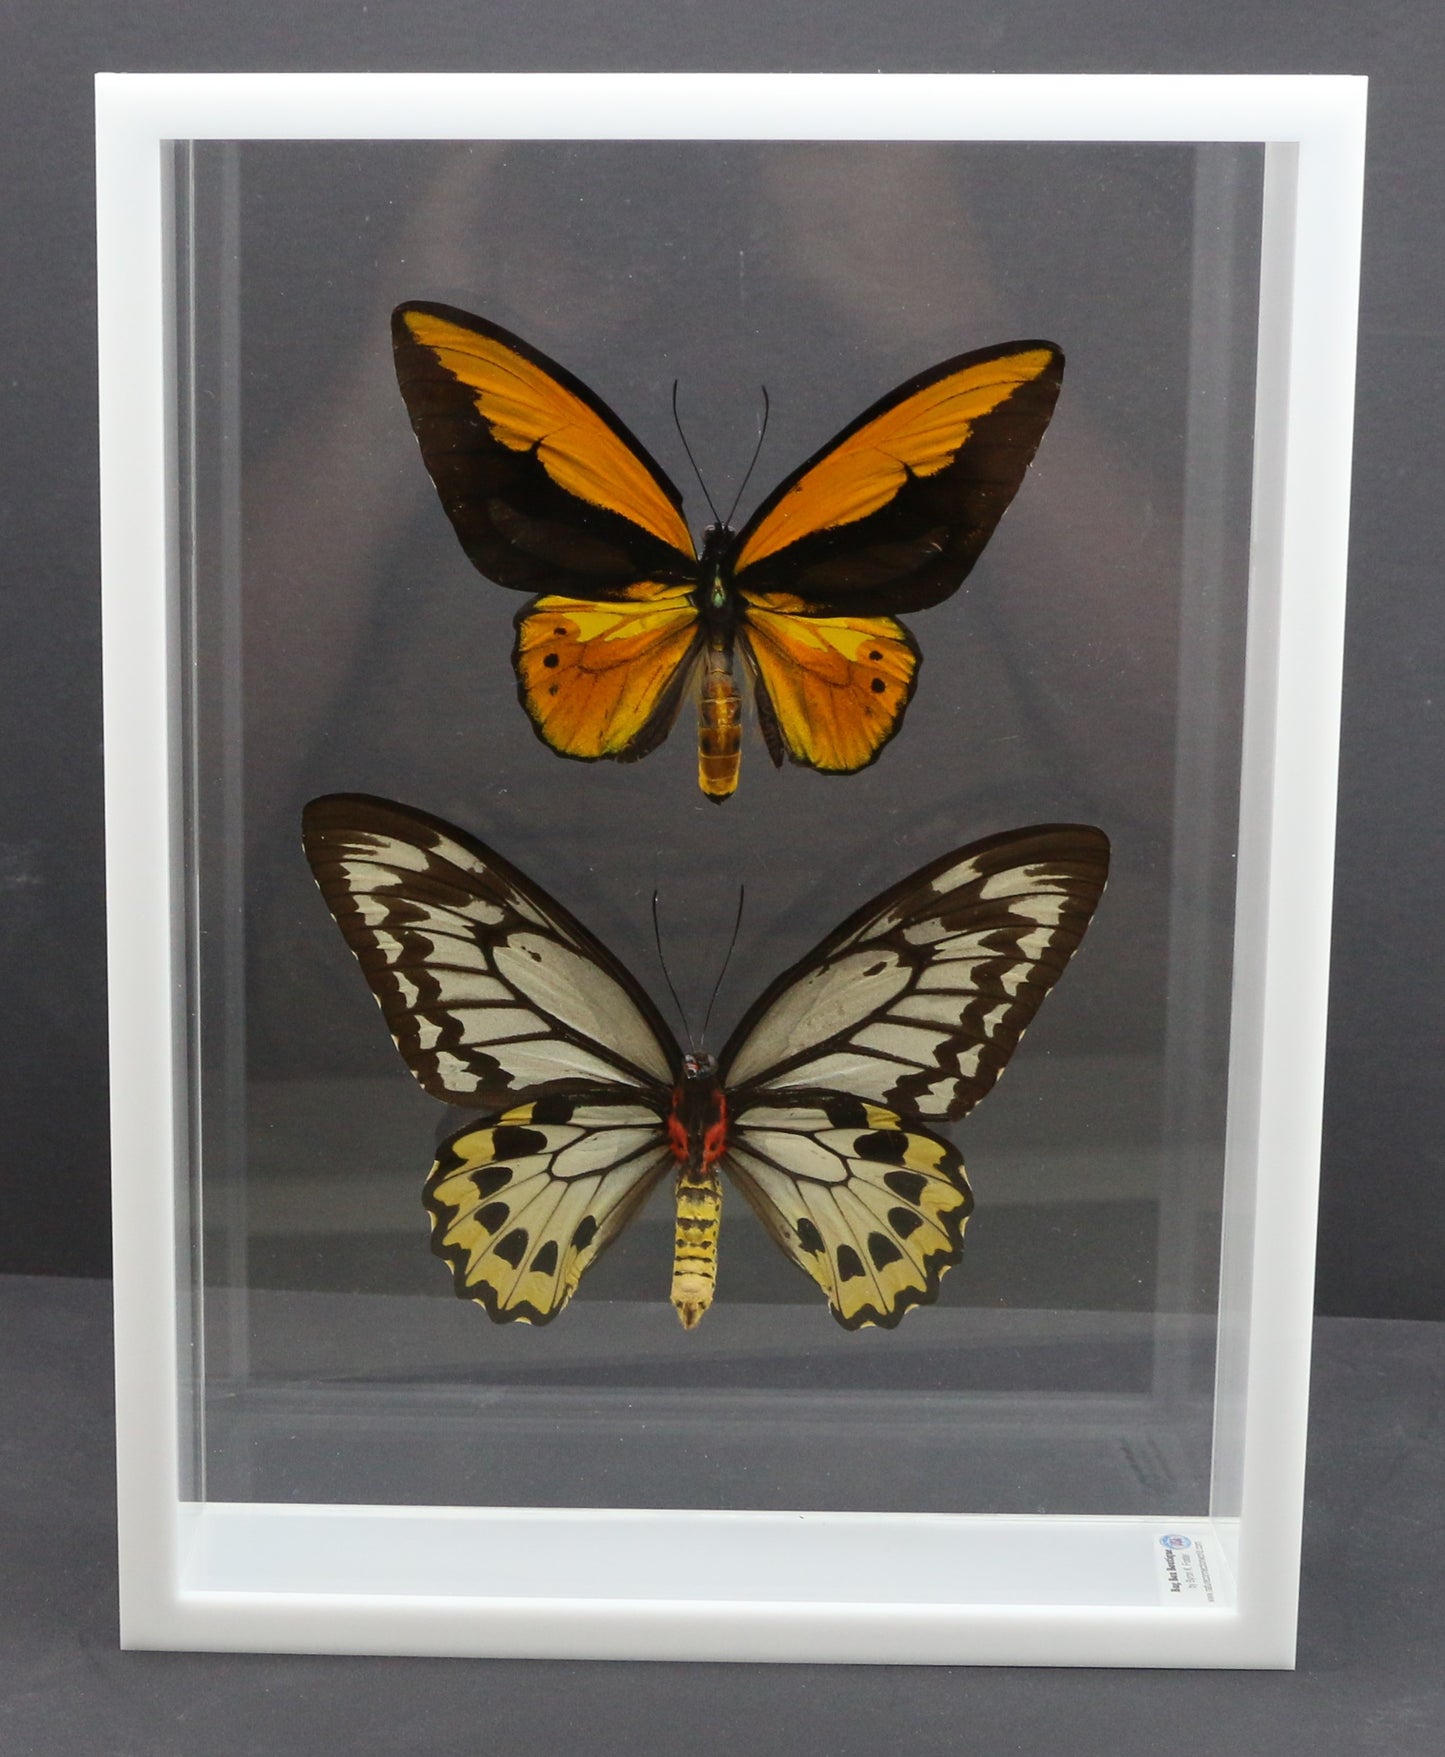 9101001 - Real Butterfly Acrylic Display Box - 9" X 12" - Gold Bird Wing - Pair